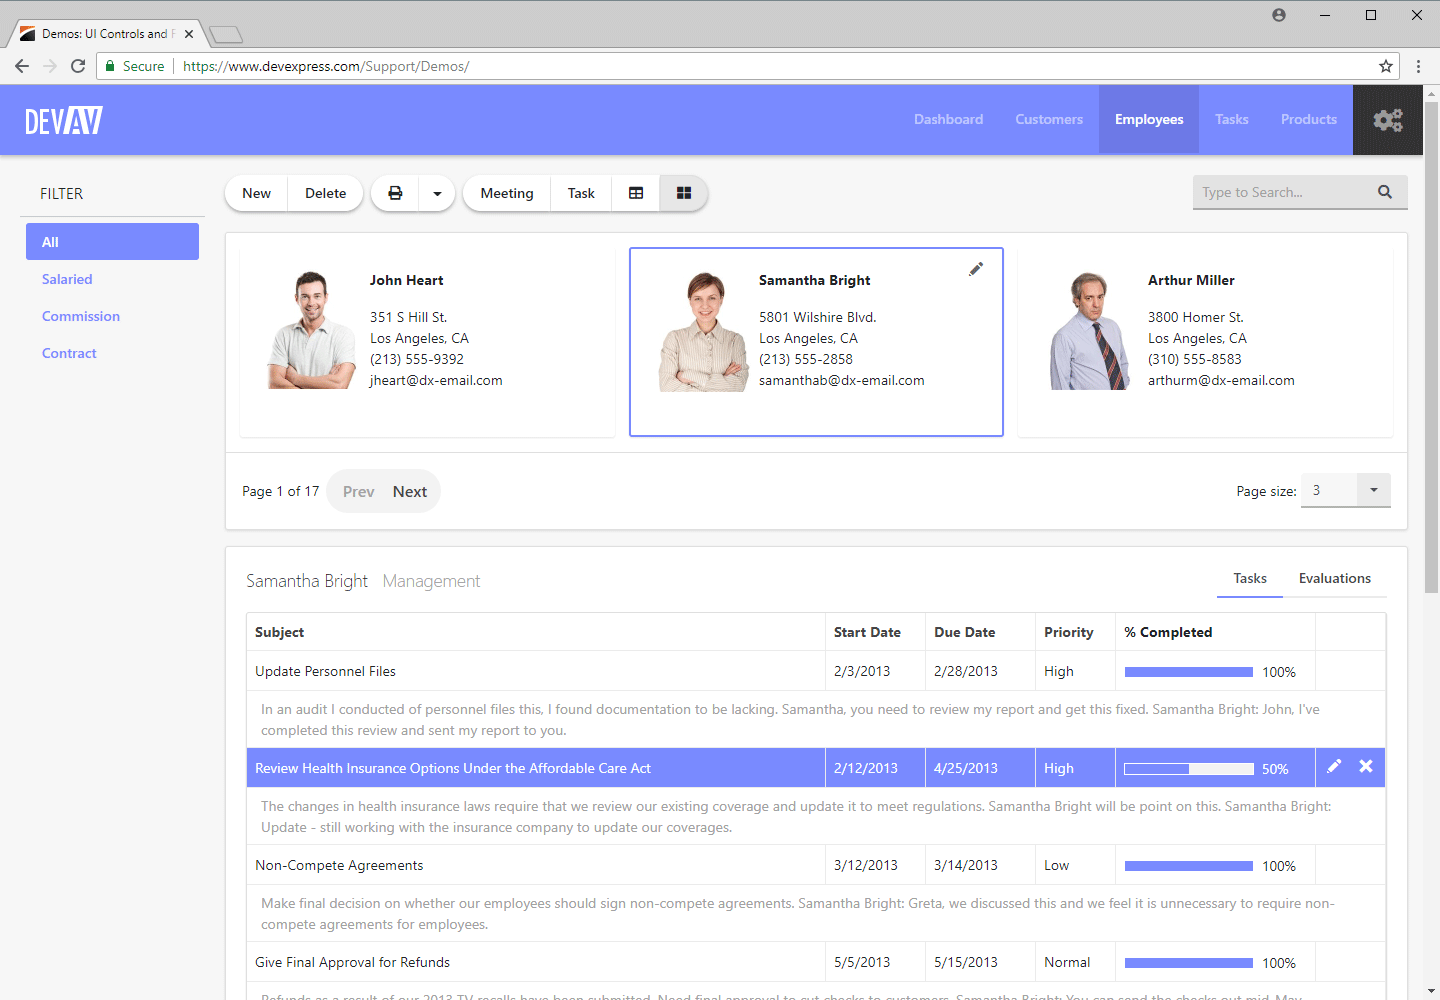 ASP.NET Bootstrap Web Forms App - CardView and GridView Controls